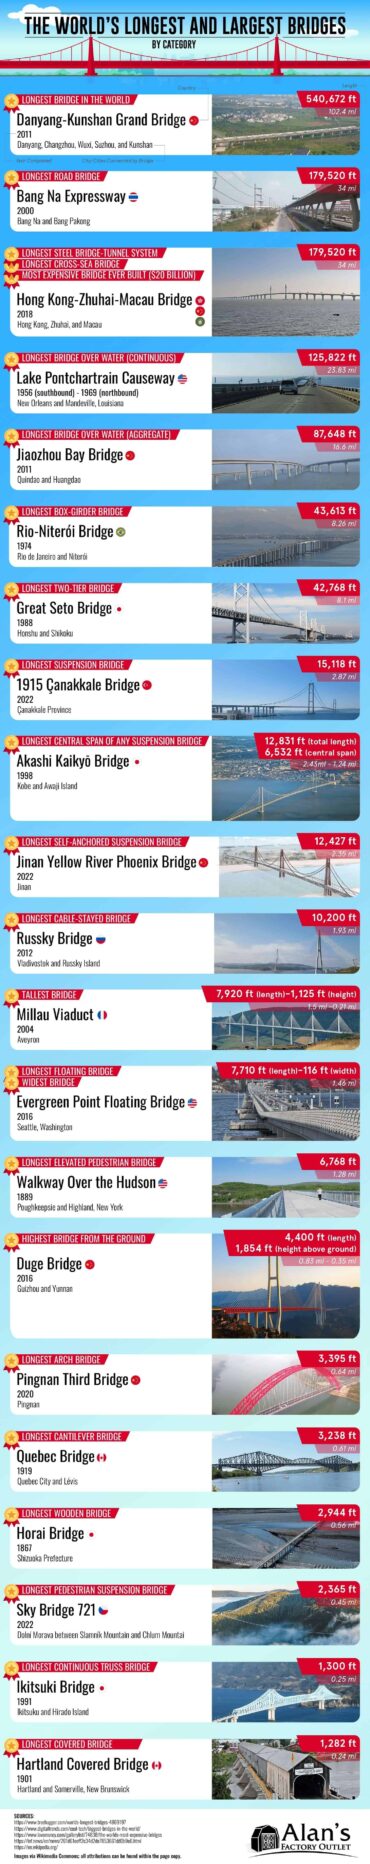 The World’s Longest and Largest Bridges by Category